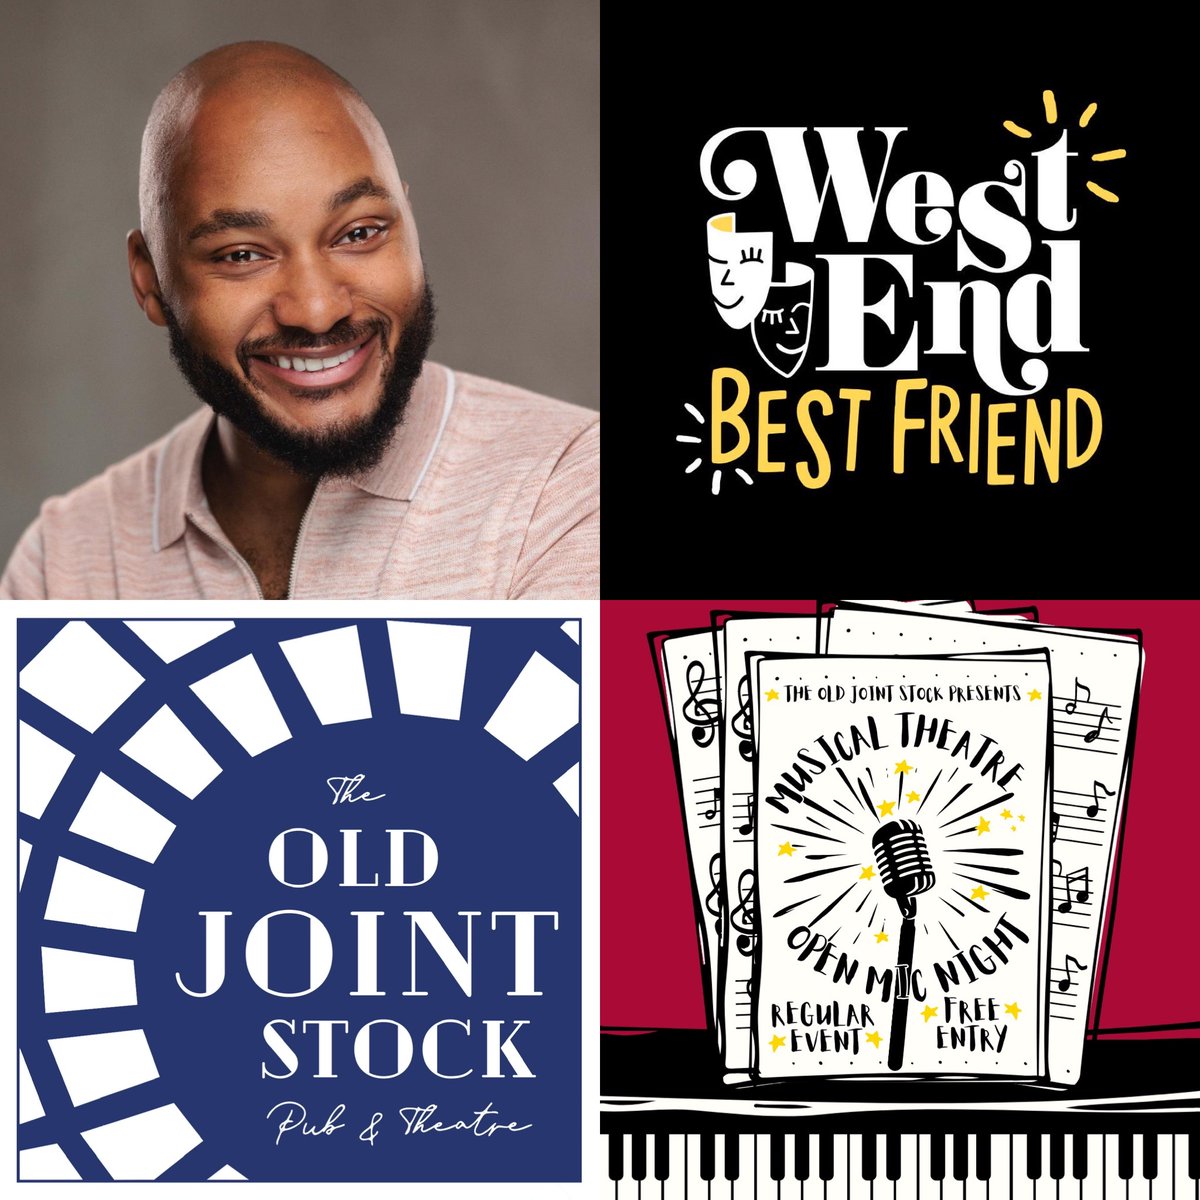 YOUR MUSICAL THEATRE OPEN MIC NIGHT RETURNS! 🎵 📅 28th June Hosted by the incredible Dom Hartley-Harris (The Preacher in Bonnie and Clyde; George Washington in Hamilton) and live streamed by @WESTENDBF Email your requests before MONDAY 17th JUNE to OJStheatre@gmail.com